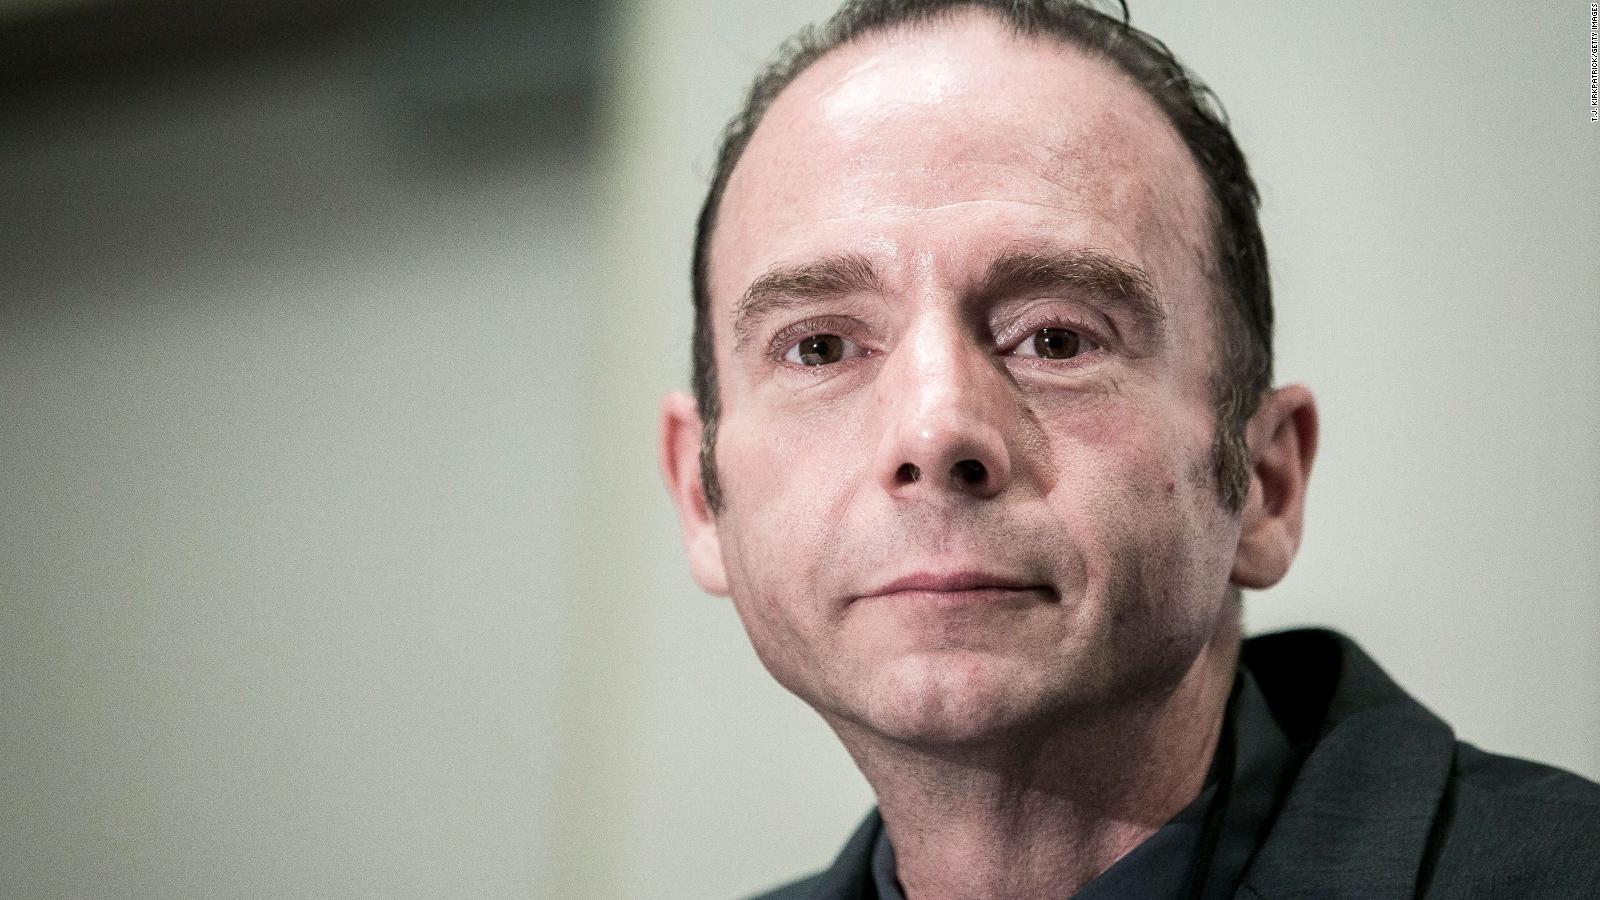 Timothy Ray Brown The First Known Person To Be Cured Of Hiv Has Died